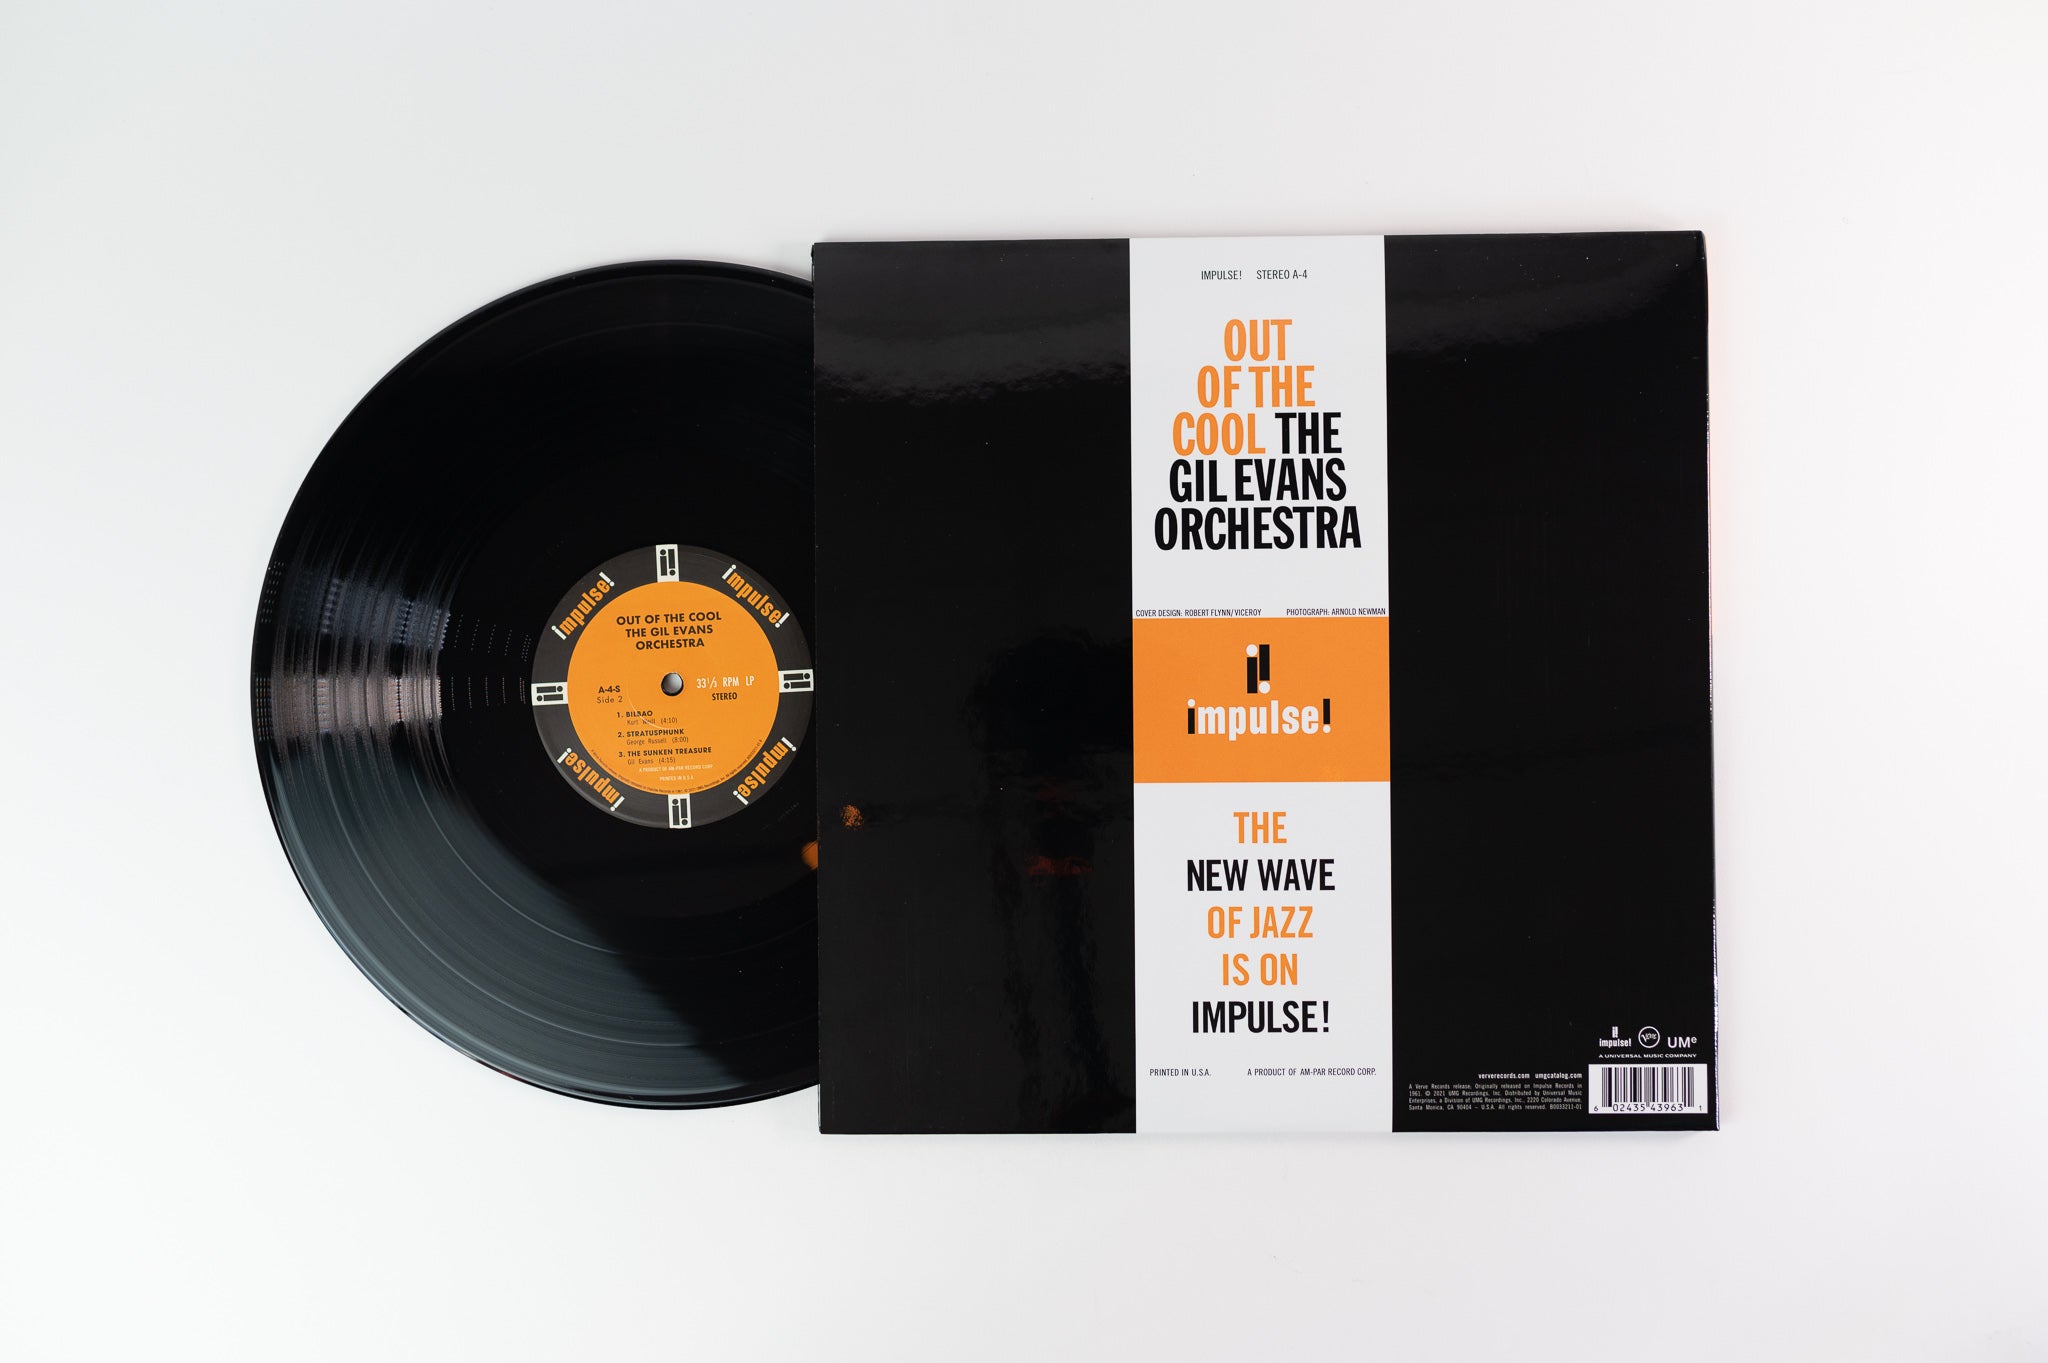 Gil Evans And His Orchestra - Out Of The Cool on Impulse Acoustic Sound Series Reissue